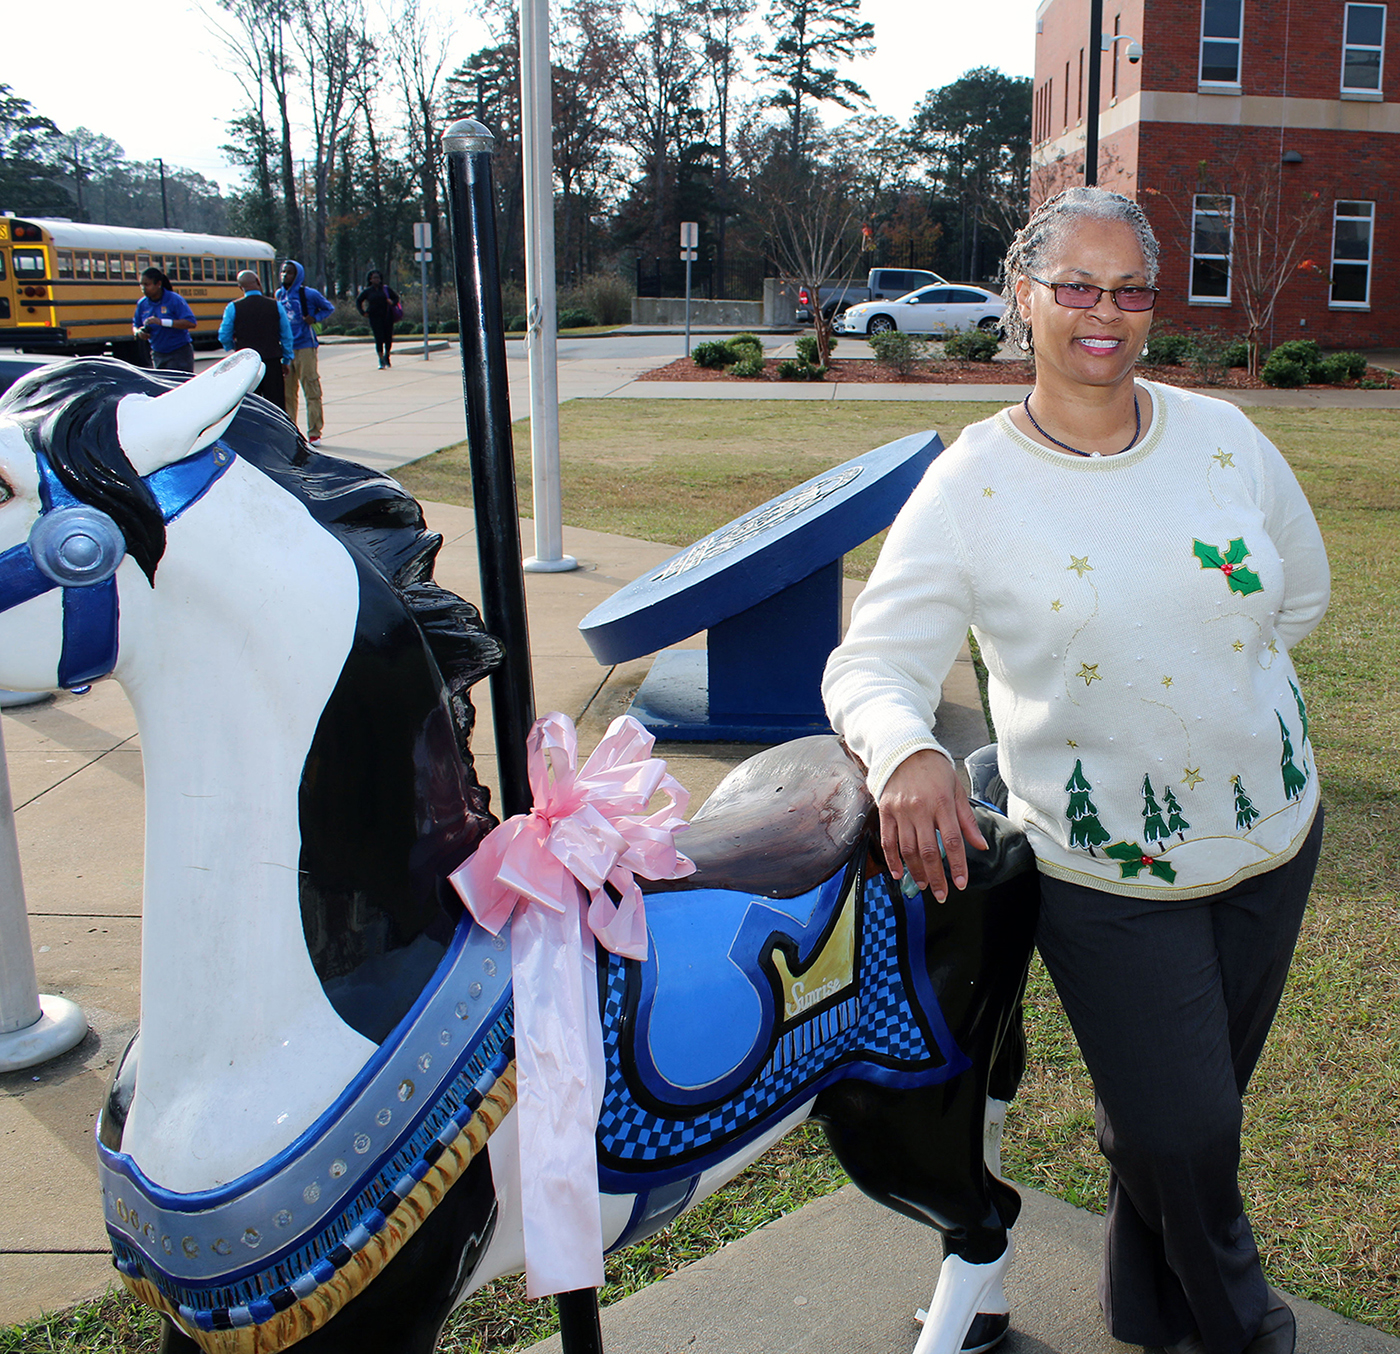 Minnie Powe, 56, a teacher assistant at Meridian High School, is excited to participate in the Thursday [Dec. 7] commencement ceremony at Mississippi State University-Meridian. A native of Kemper County, Powe is one of 24 MSU students